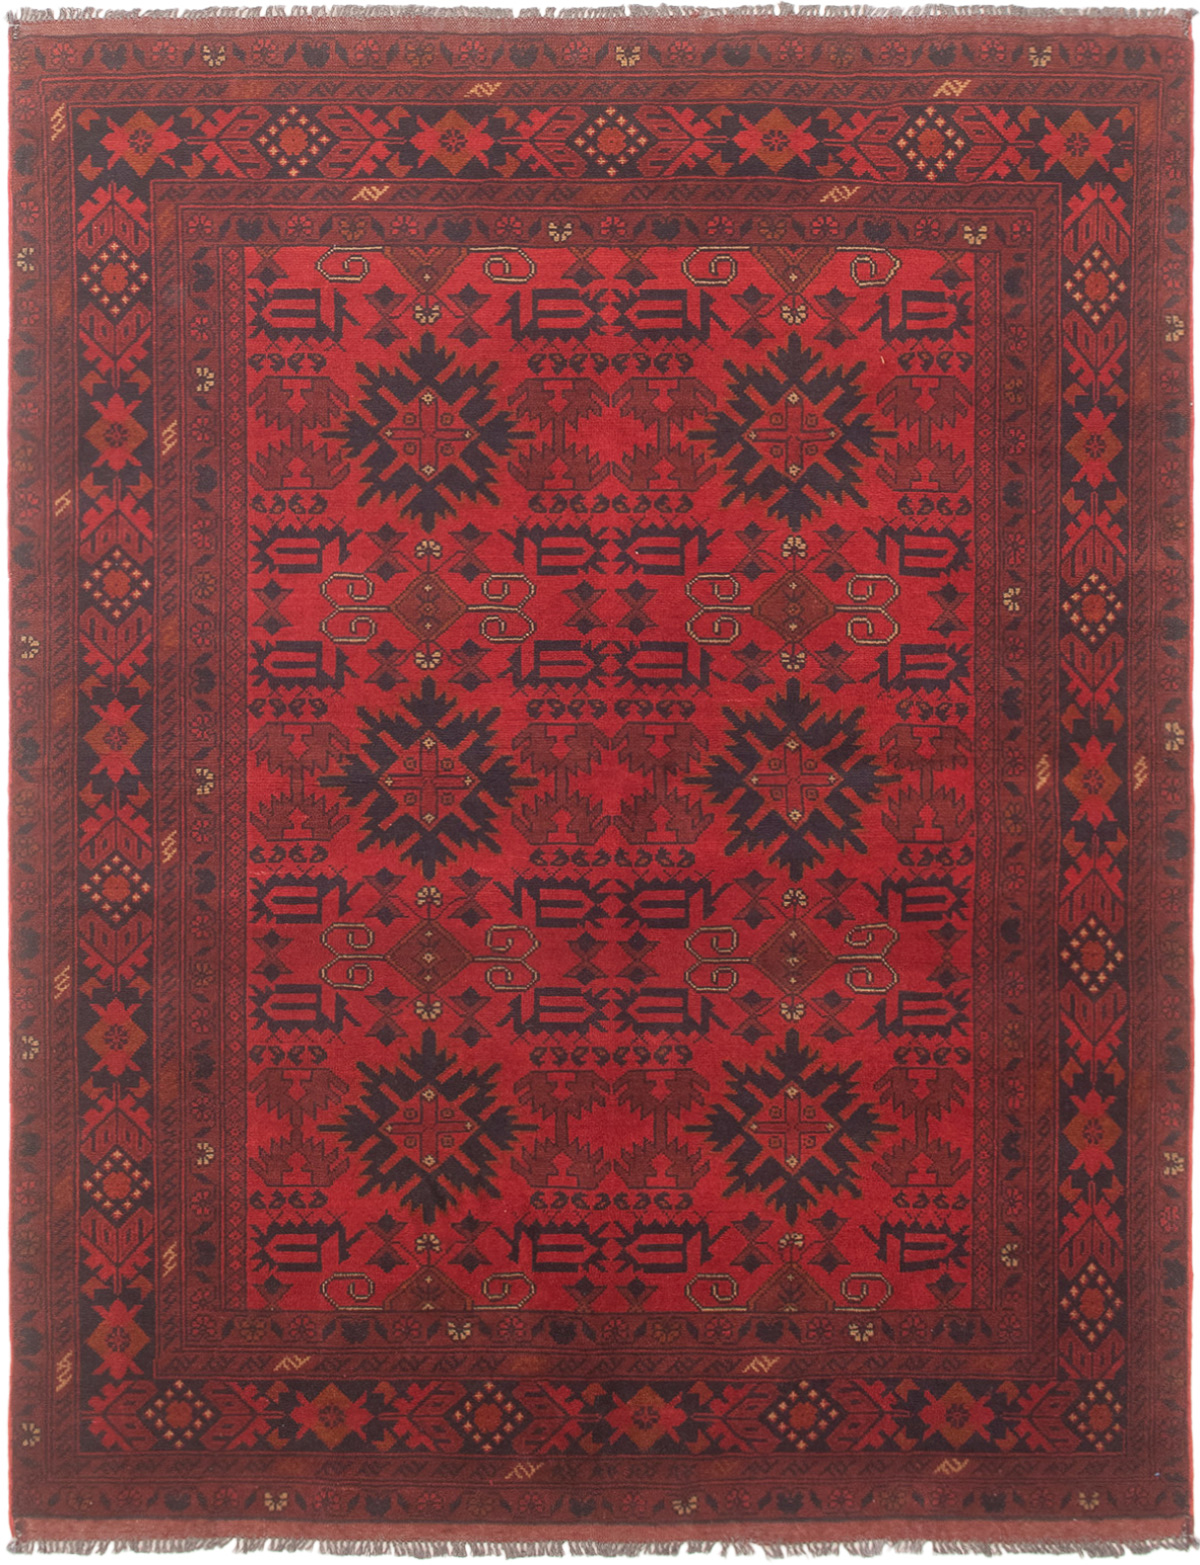 Hand-knotted Finest Khal Mohammadi Red Wool Rug 4'11" x 6'4" (18) Size: 4'11" x 6'4"  